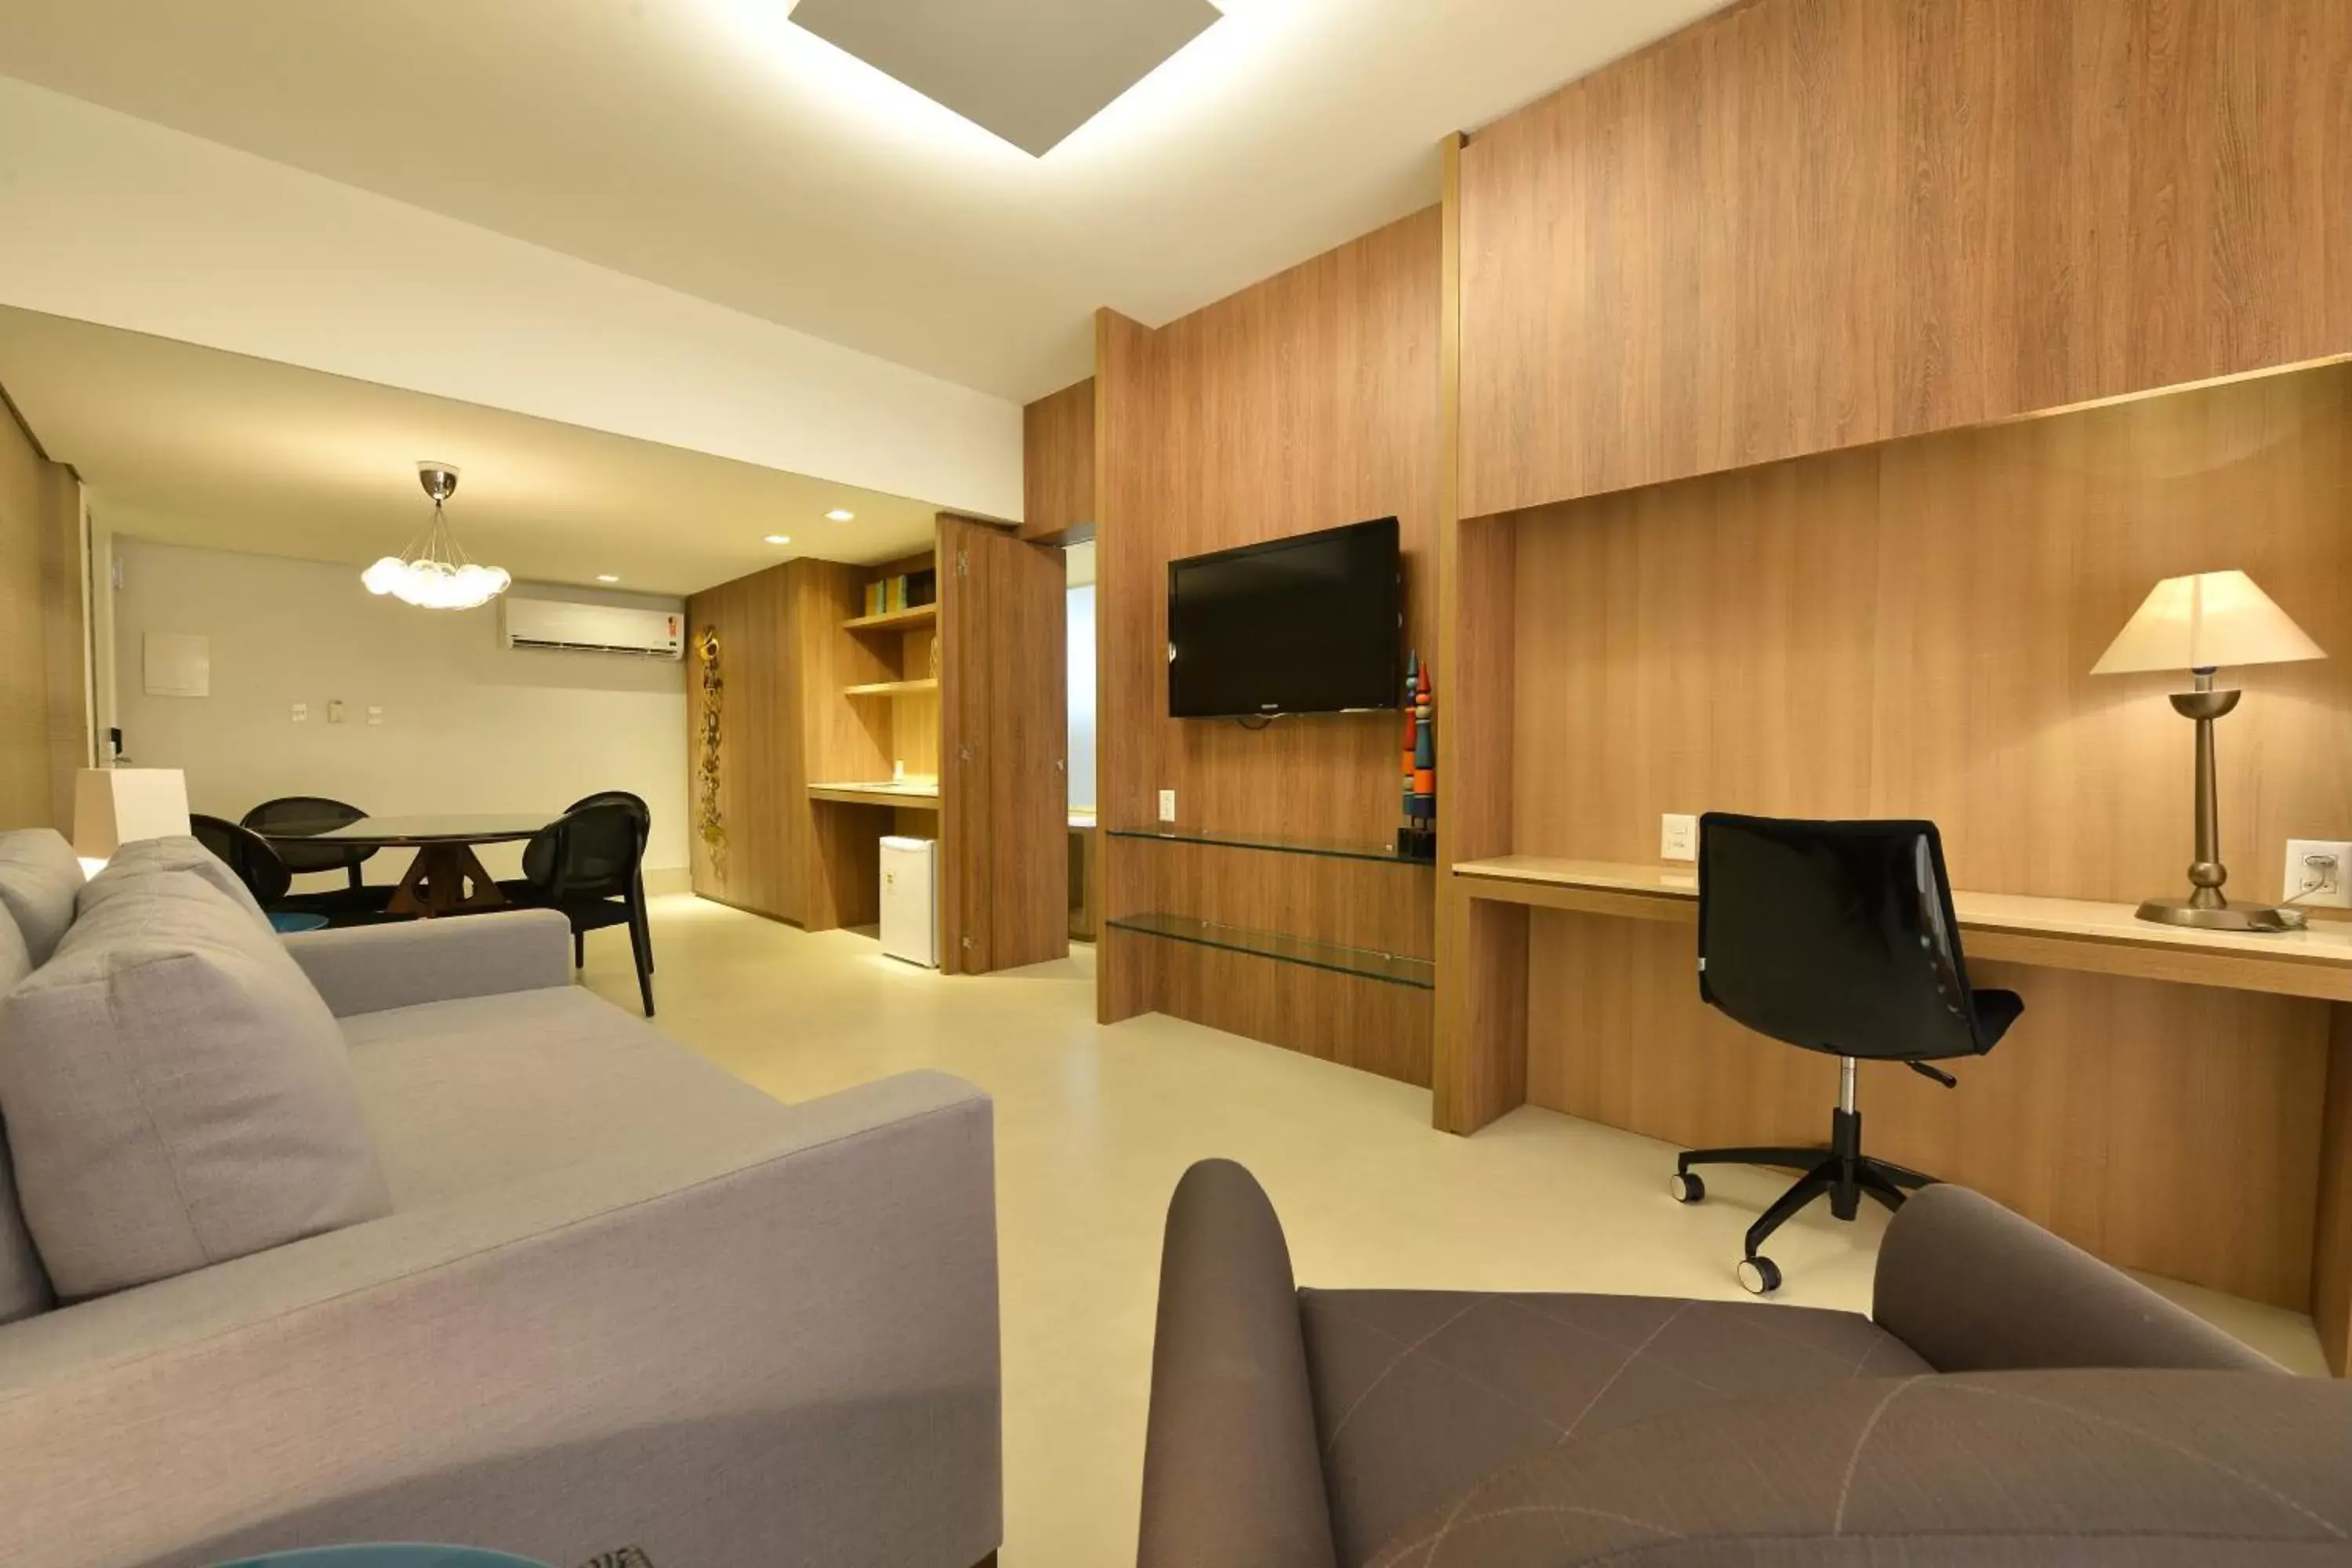 Communal lounge/ TV room, Room Photo in Hotel Beira Mar